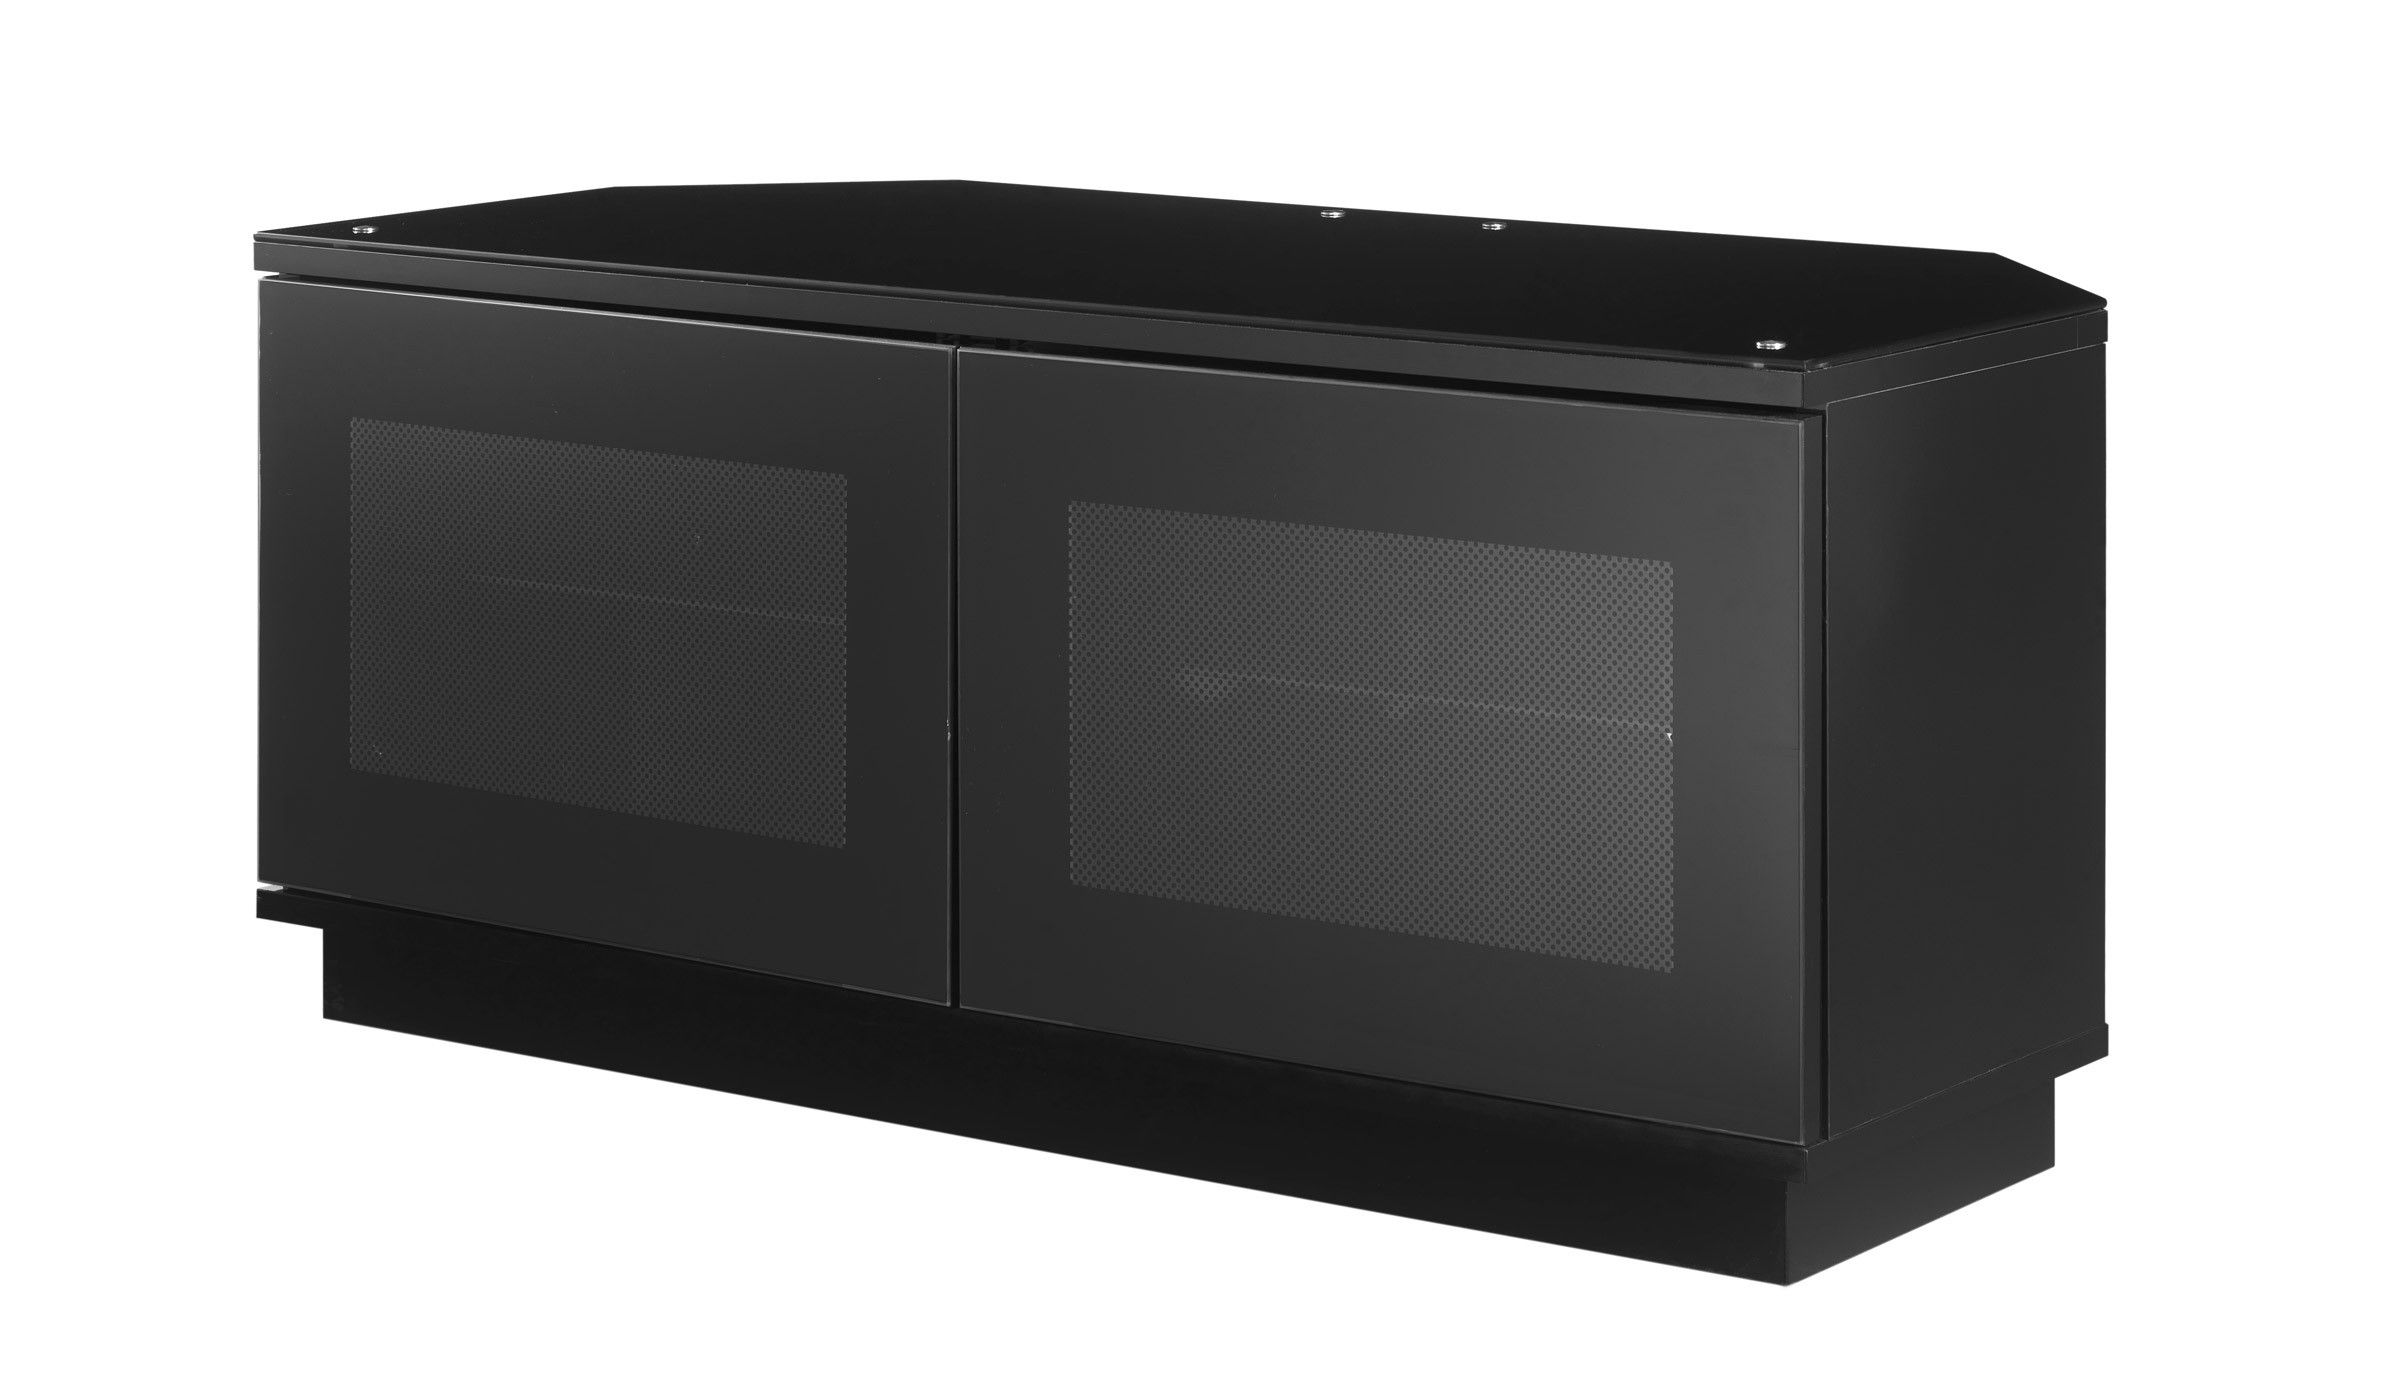 Black Tv Cabinets With Doors With Preferred Small Black Tv Stand Cabinet With Door For Corner, Corner Television (View 13 of 20)